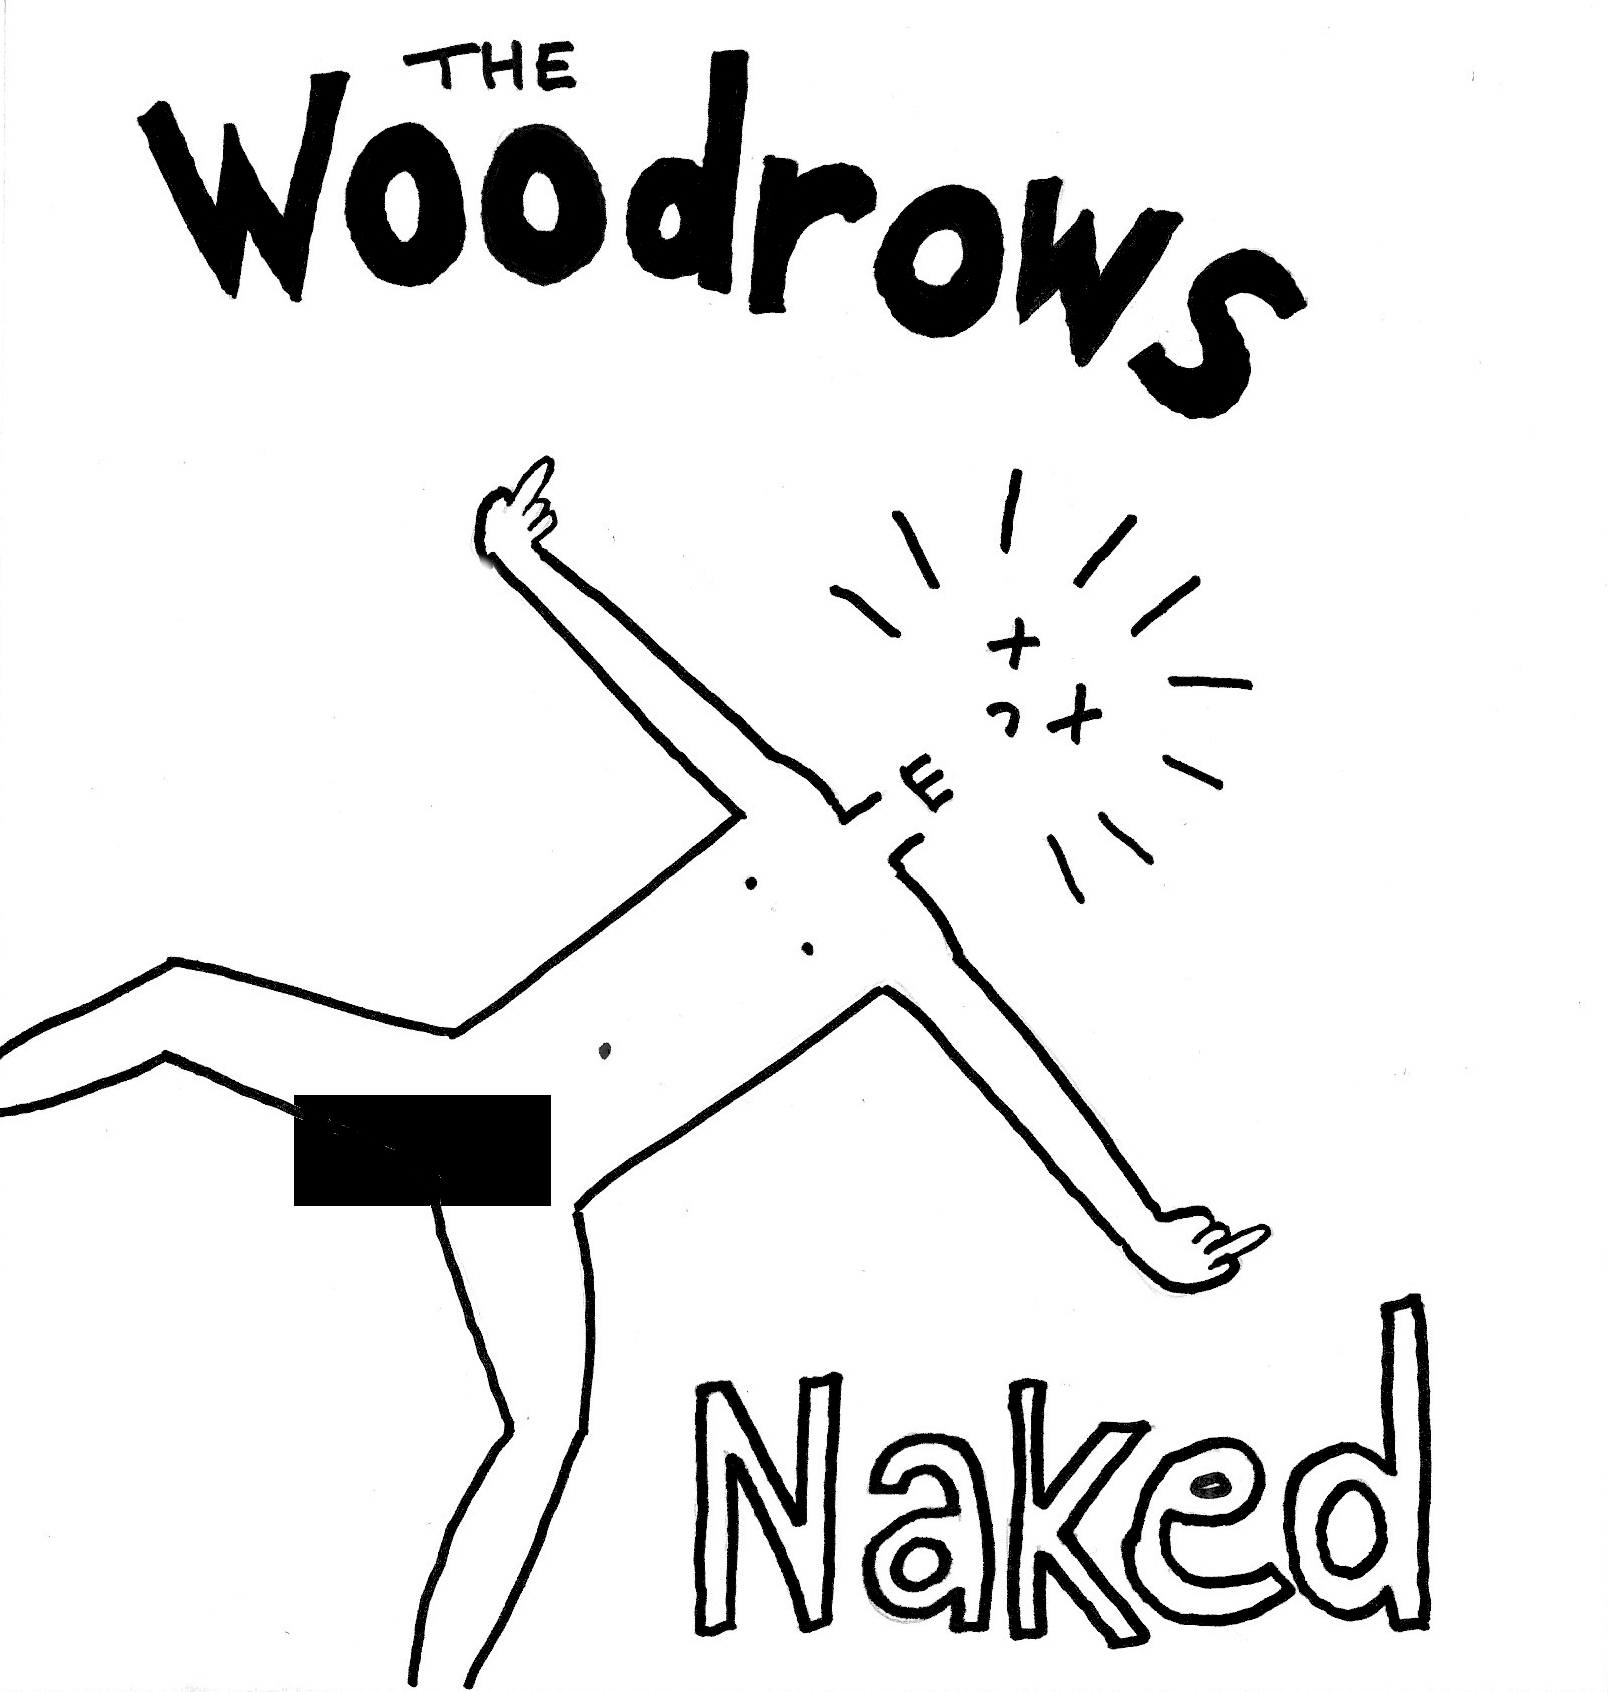 The Woodrows Naked